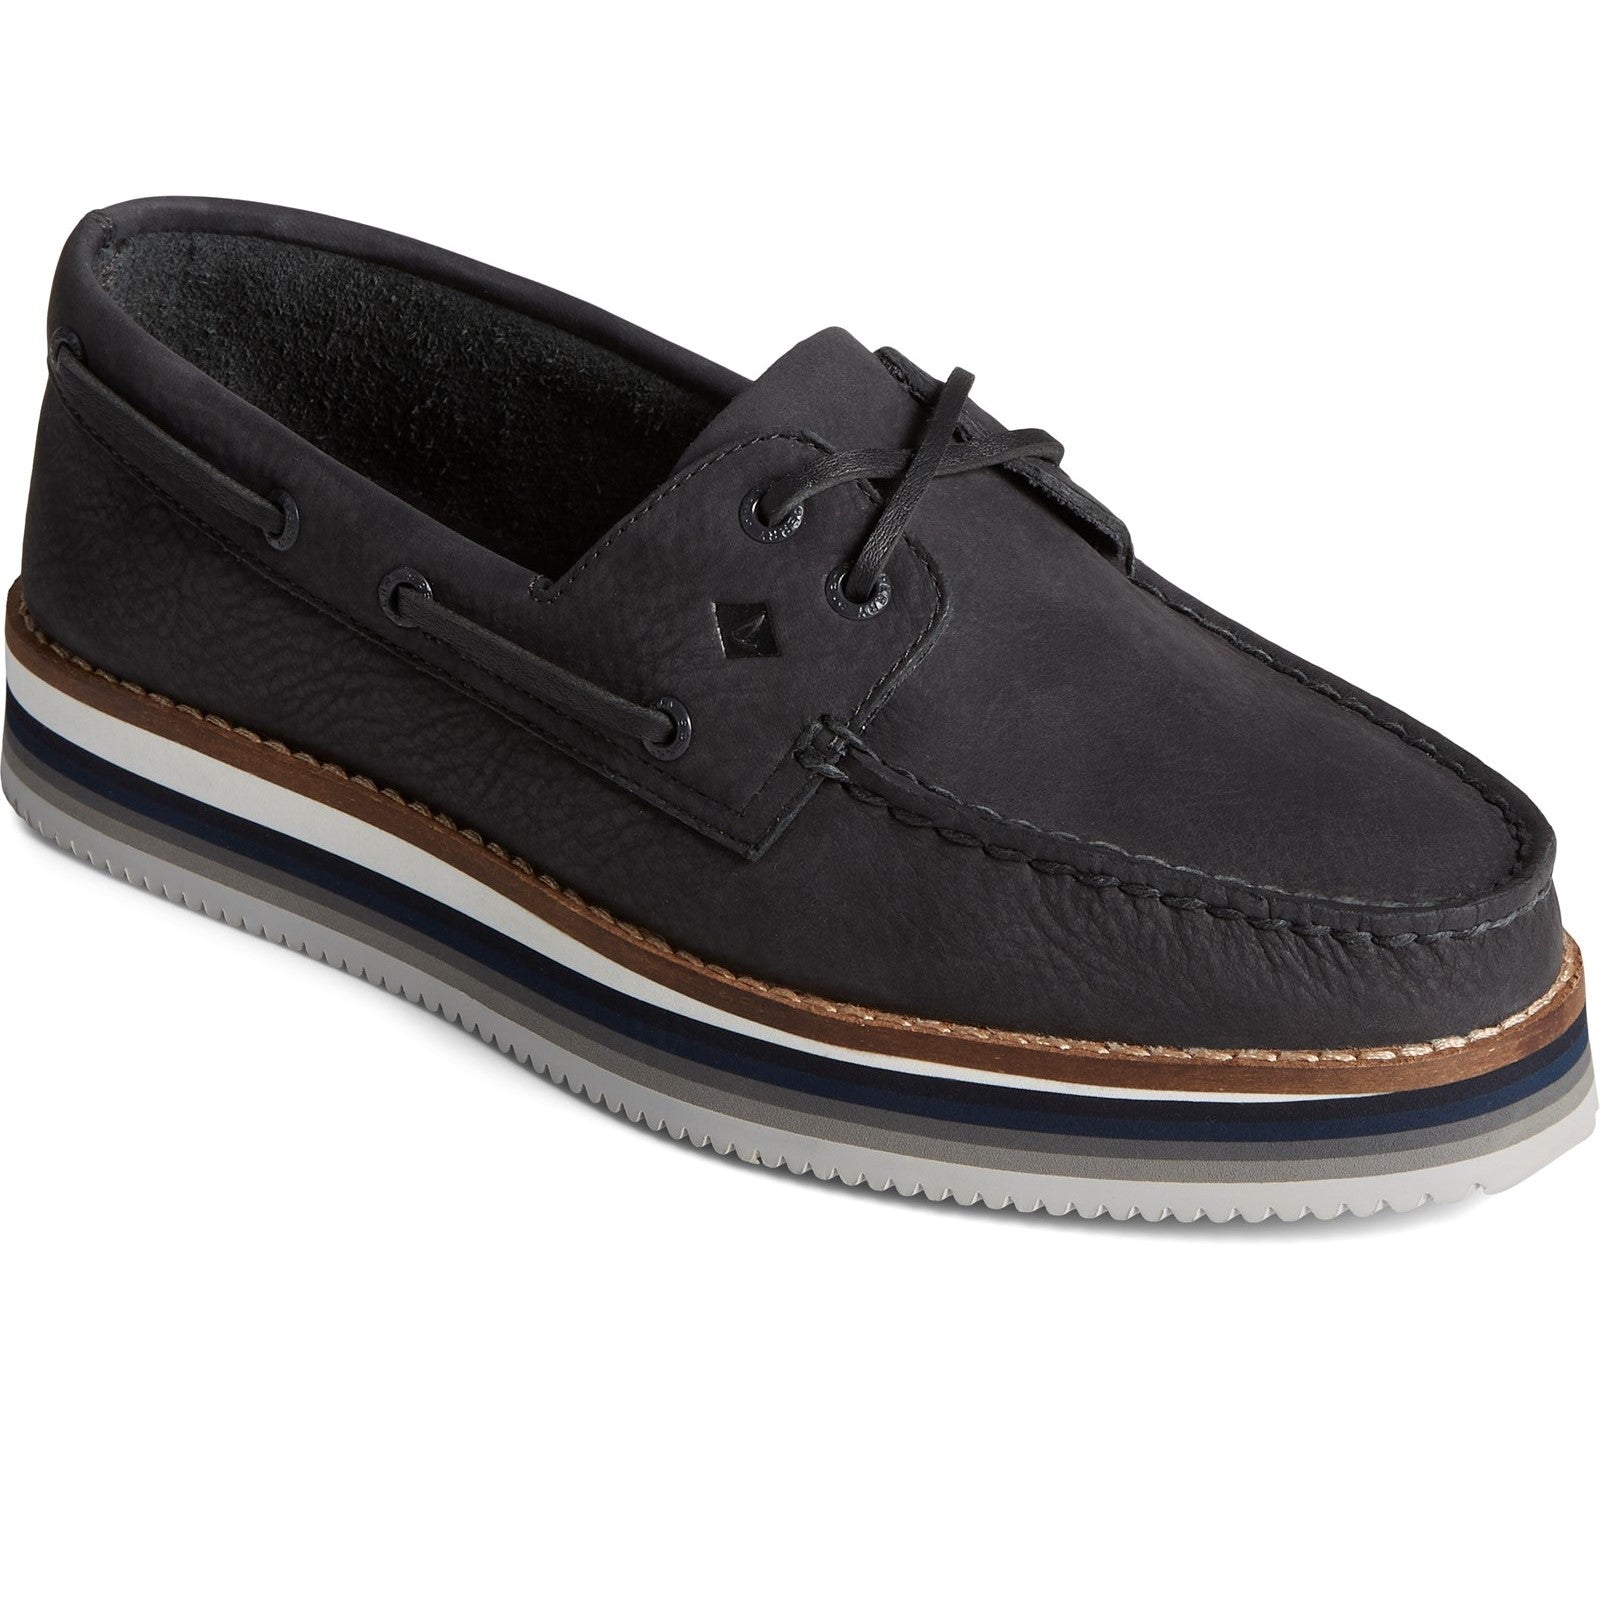 Sperry Womens Authentic Original Stacked Boat Shoes - Black